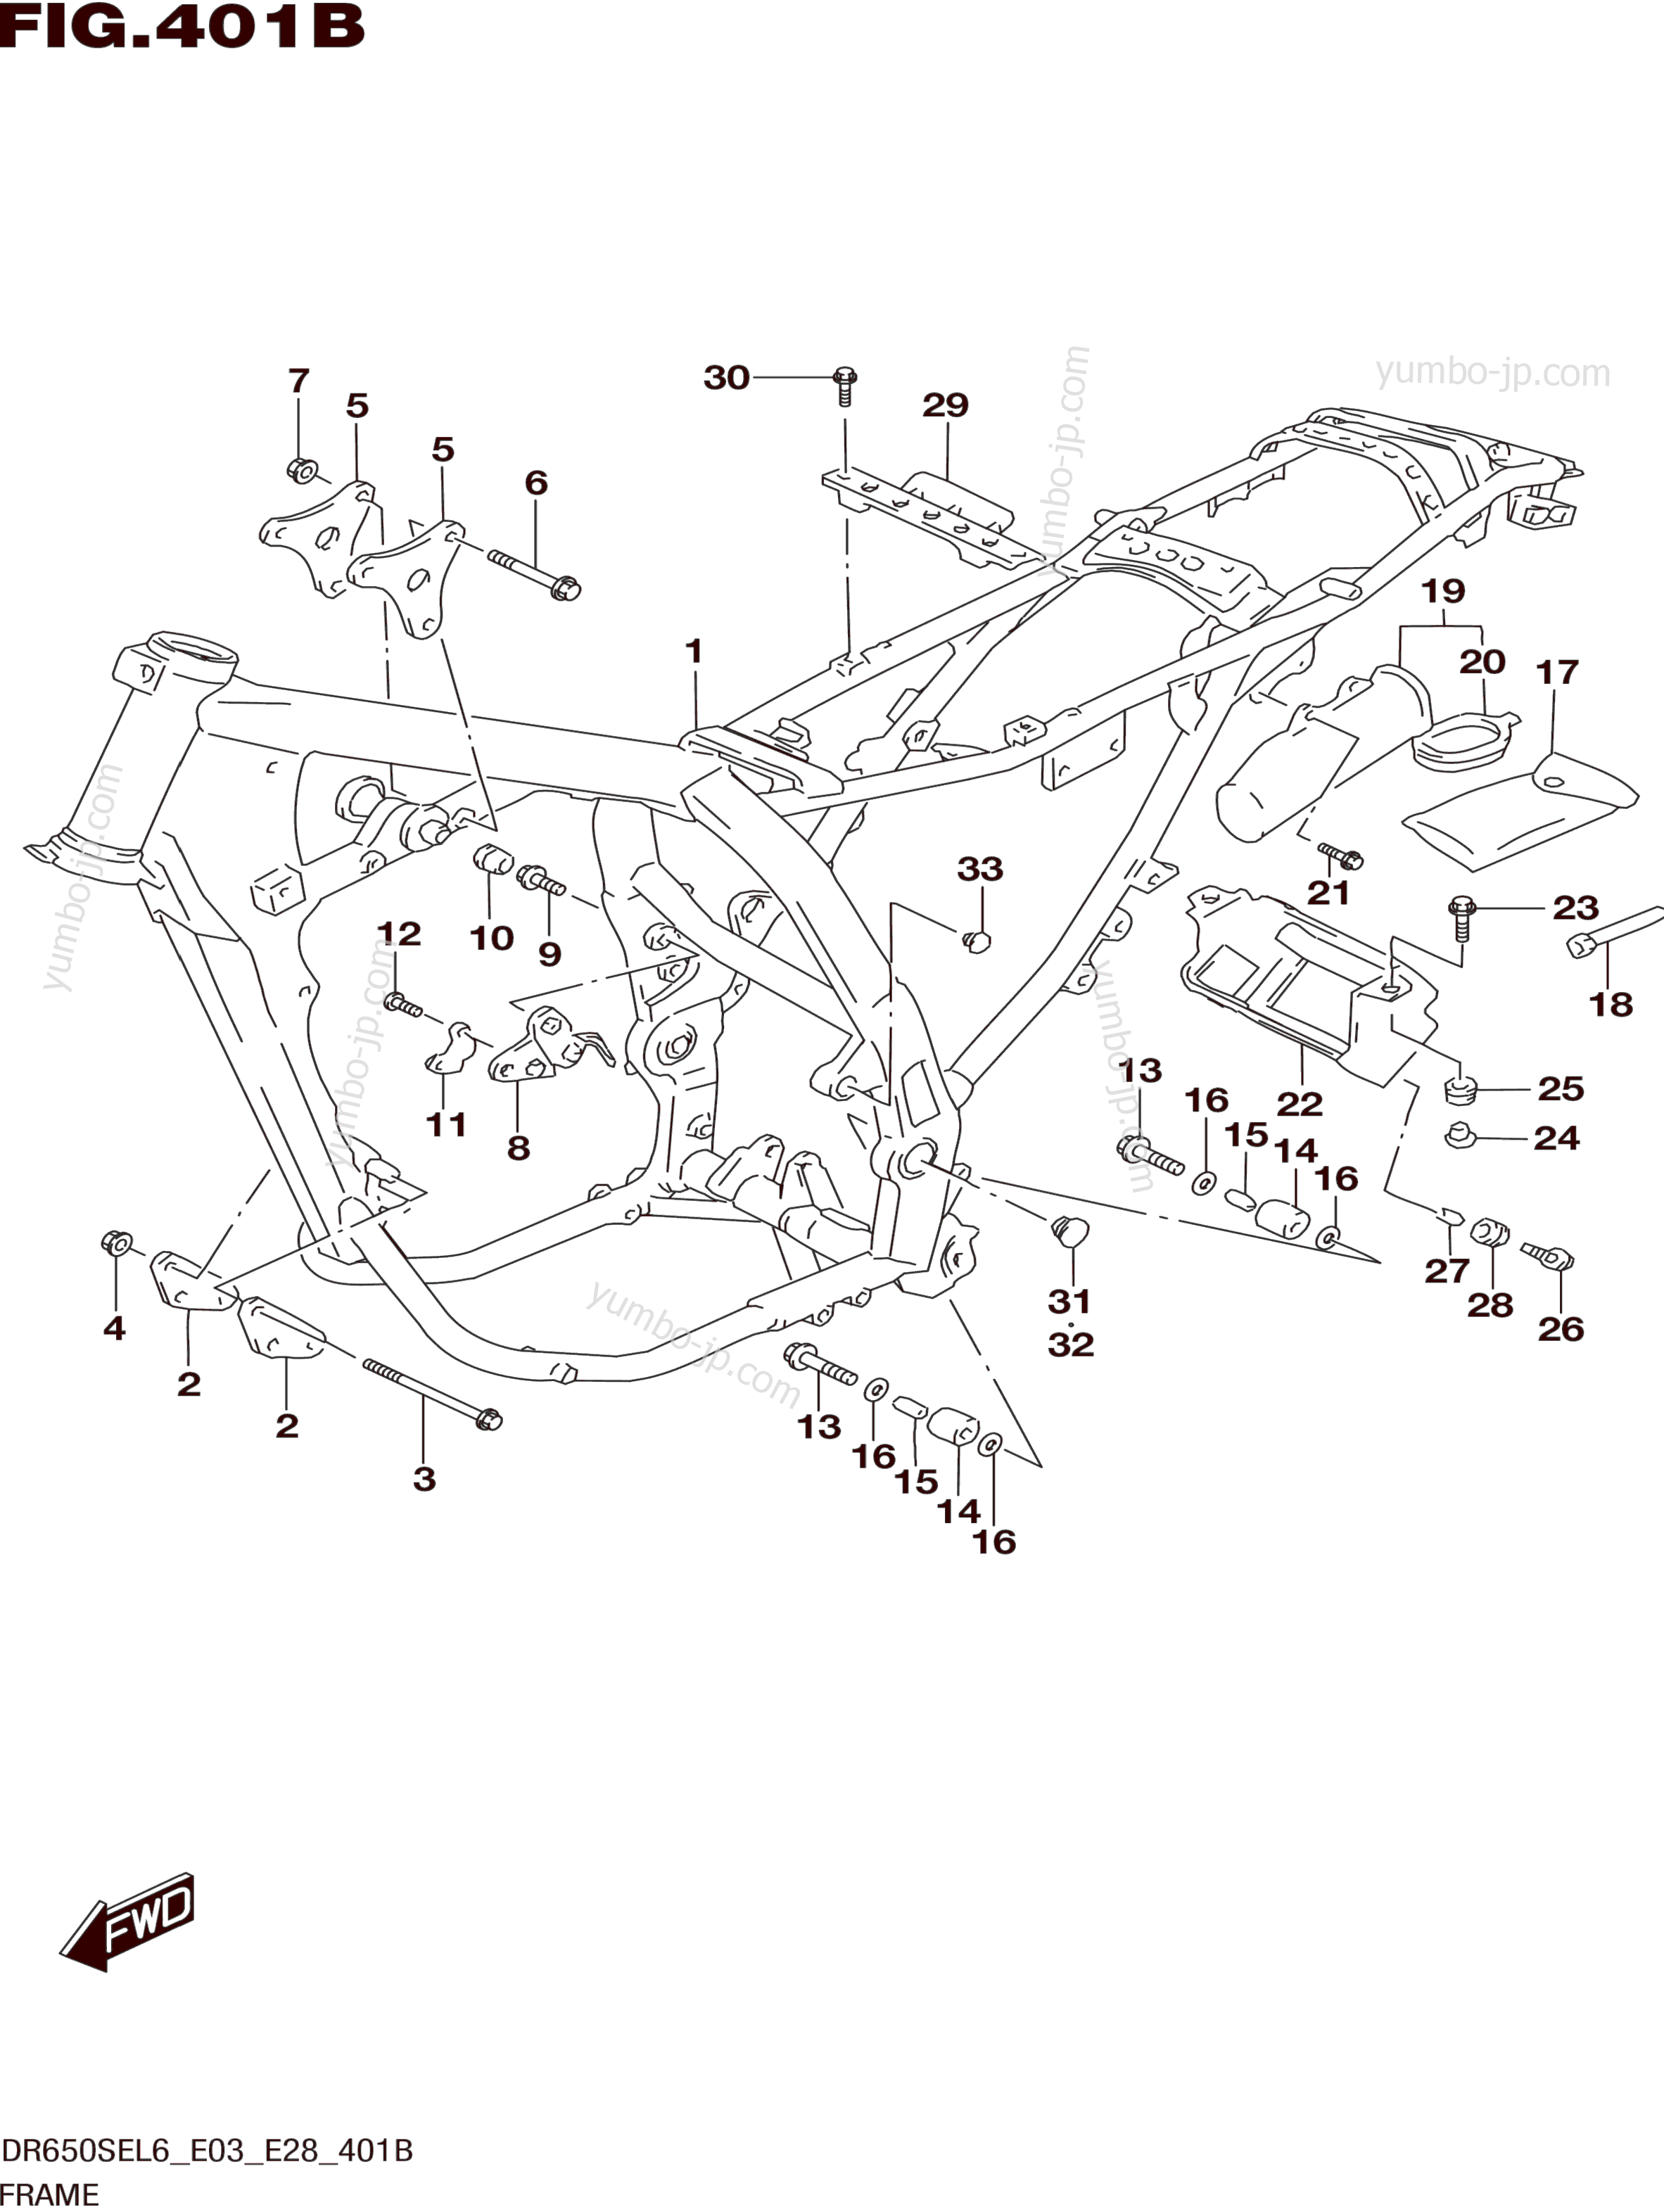 FRAME (DR650SEL6 E28) for motorcycles SUZUKI DR650SE 2016 year